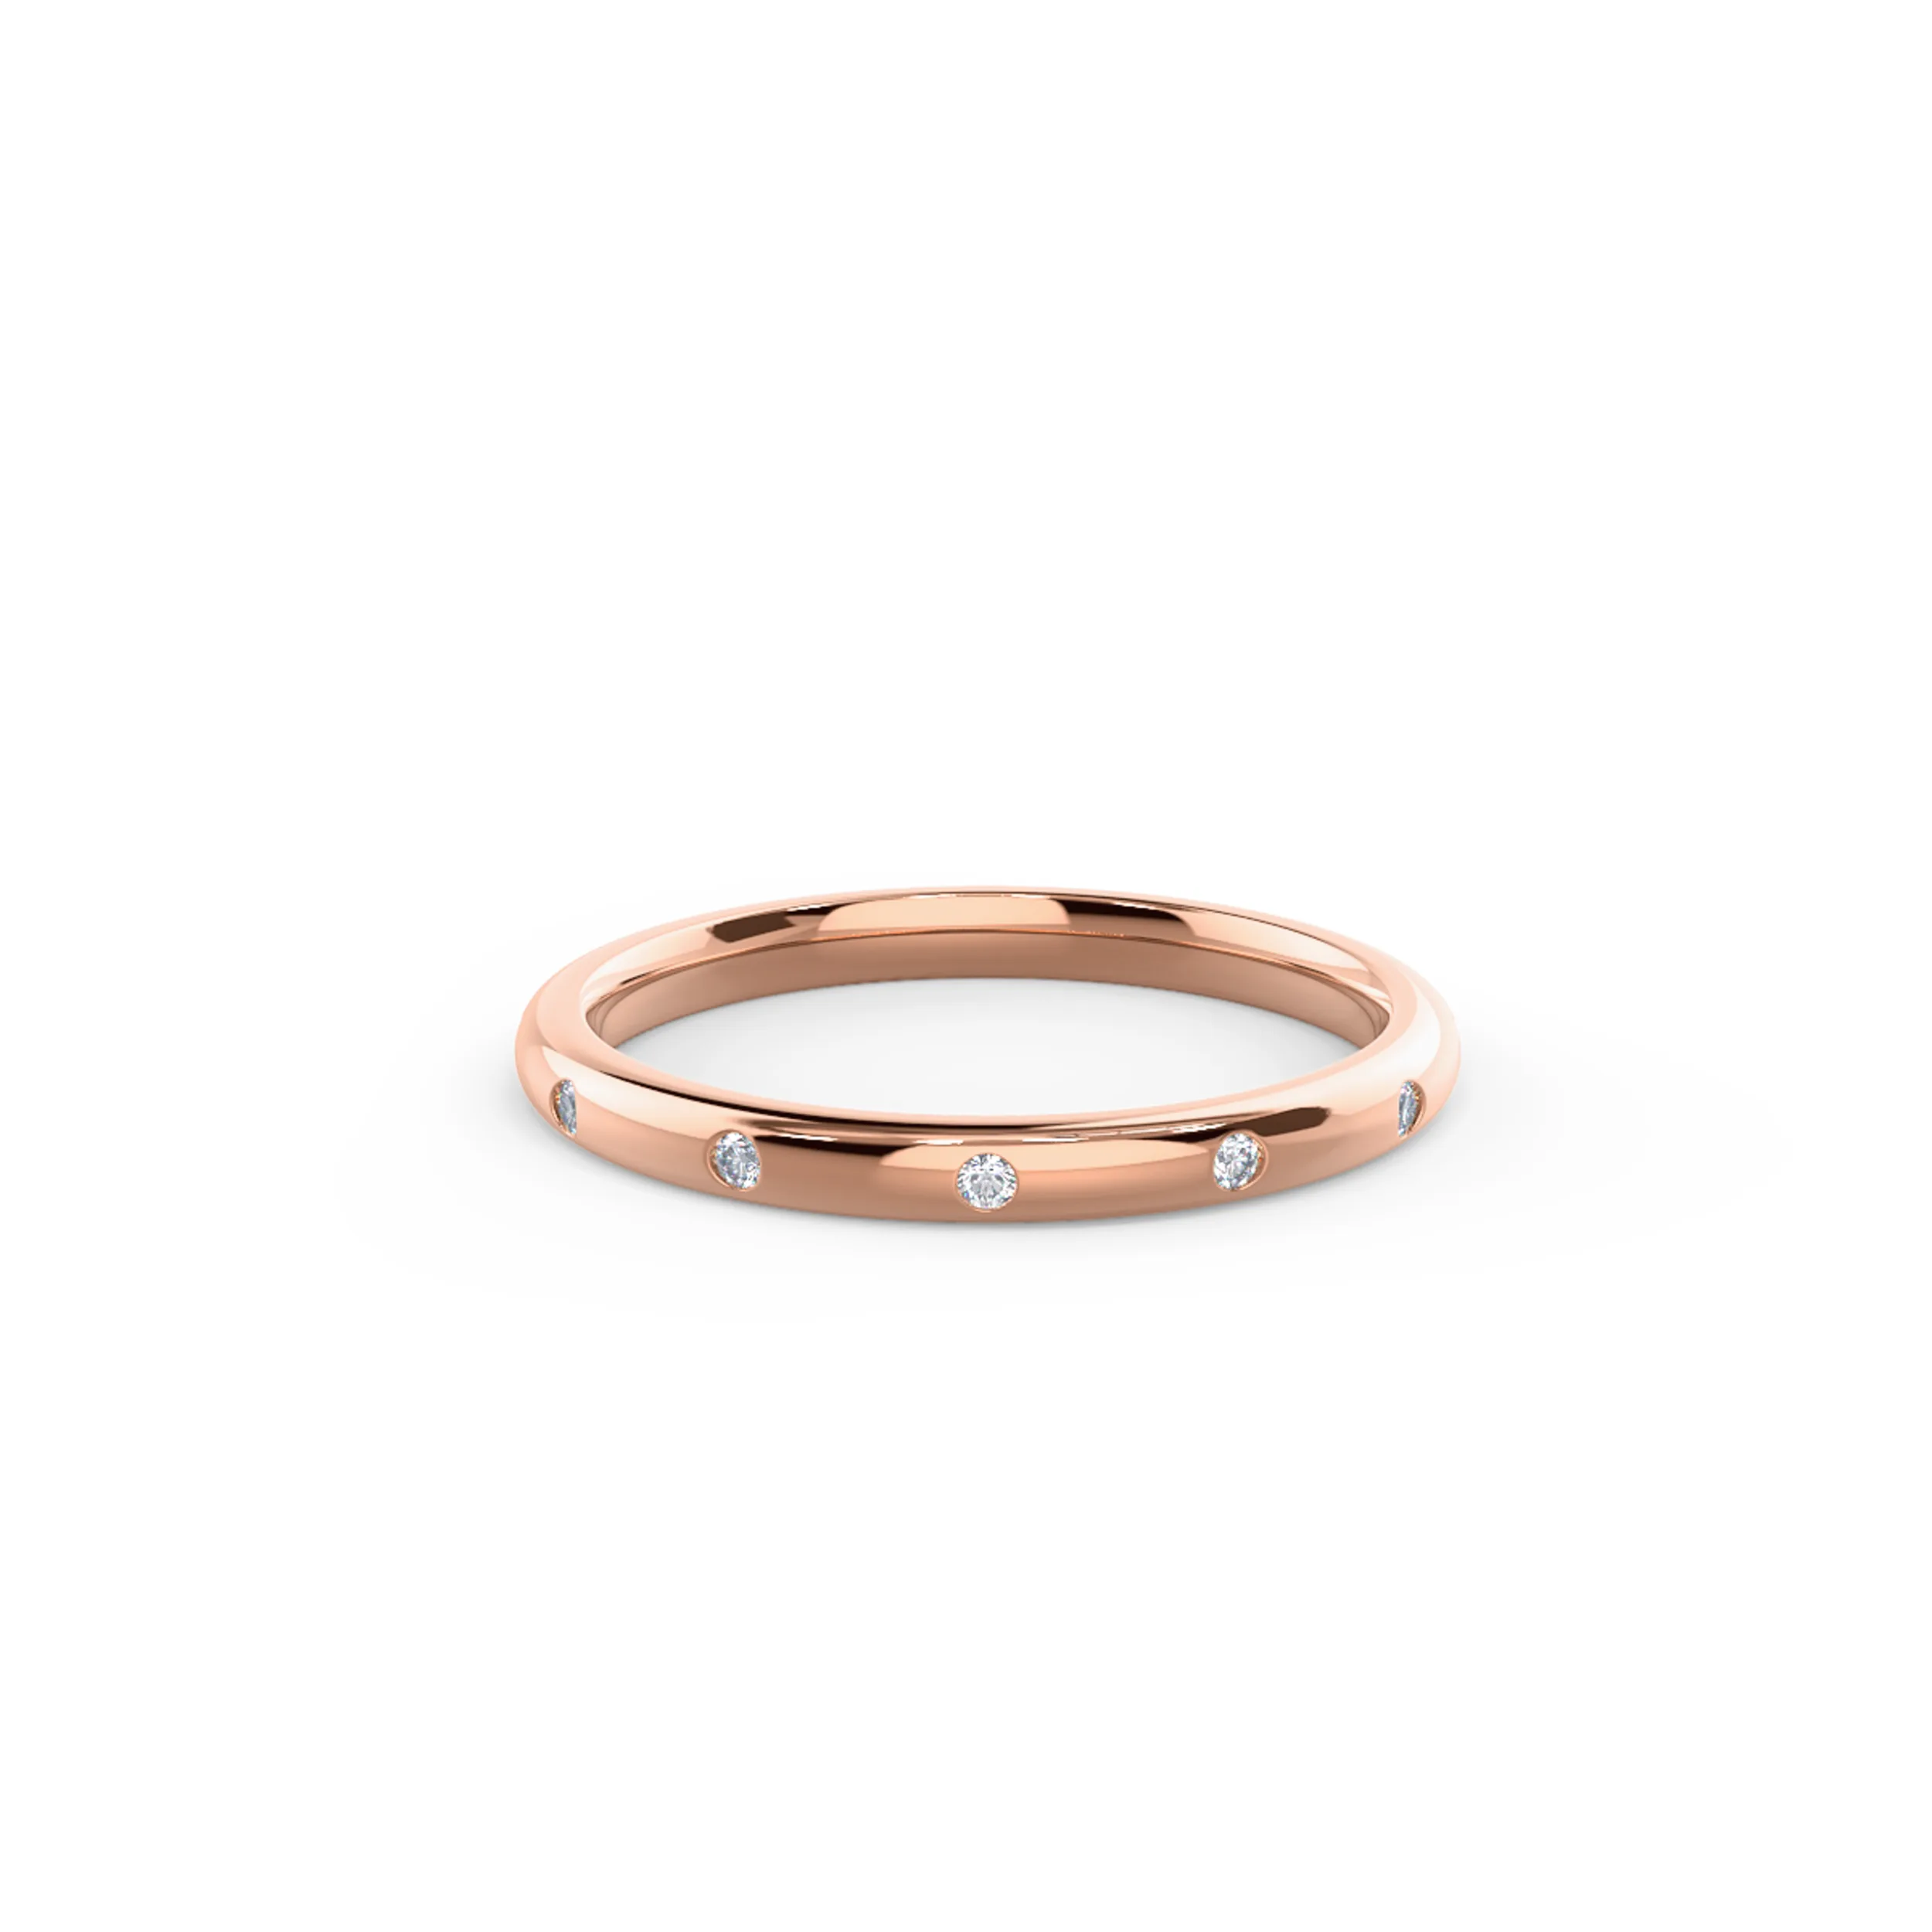 Hand Selected 0.09 ct Lab Created Diamonds Petite Rounded Flush Set Three Quarter Band in 14k Rose Gold (Main View)